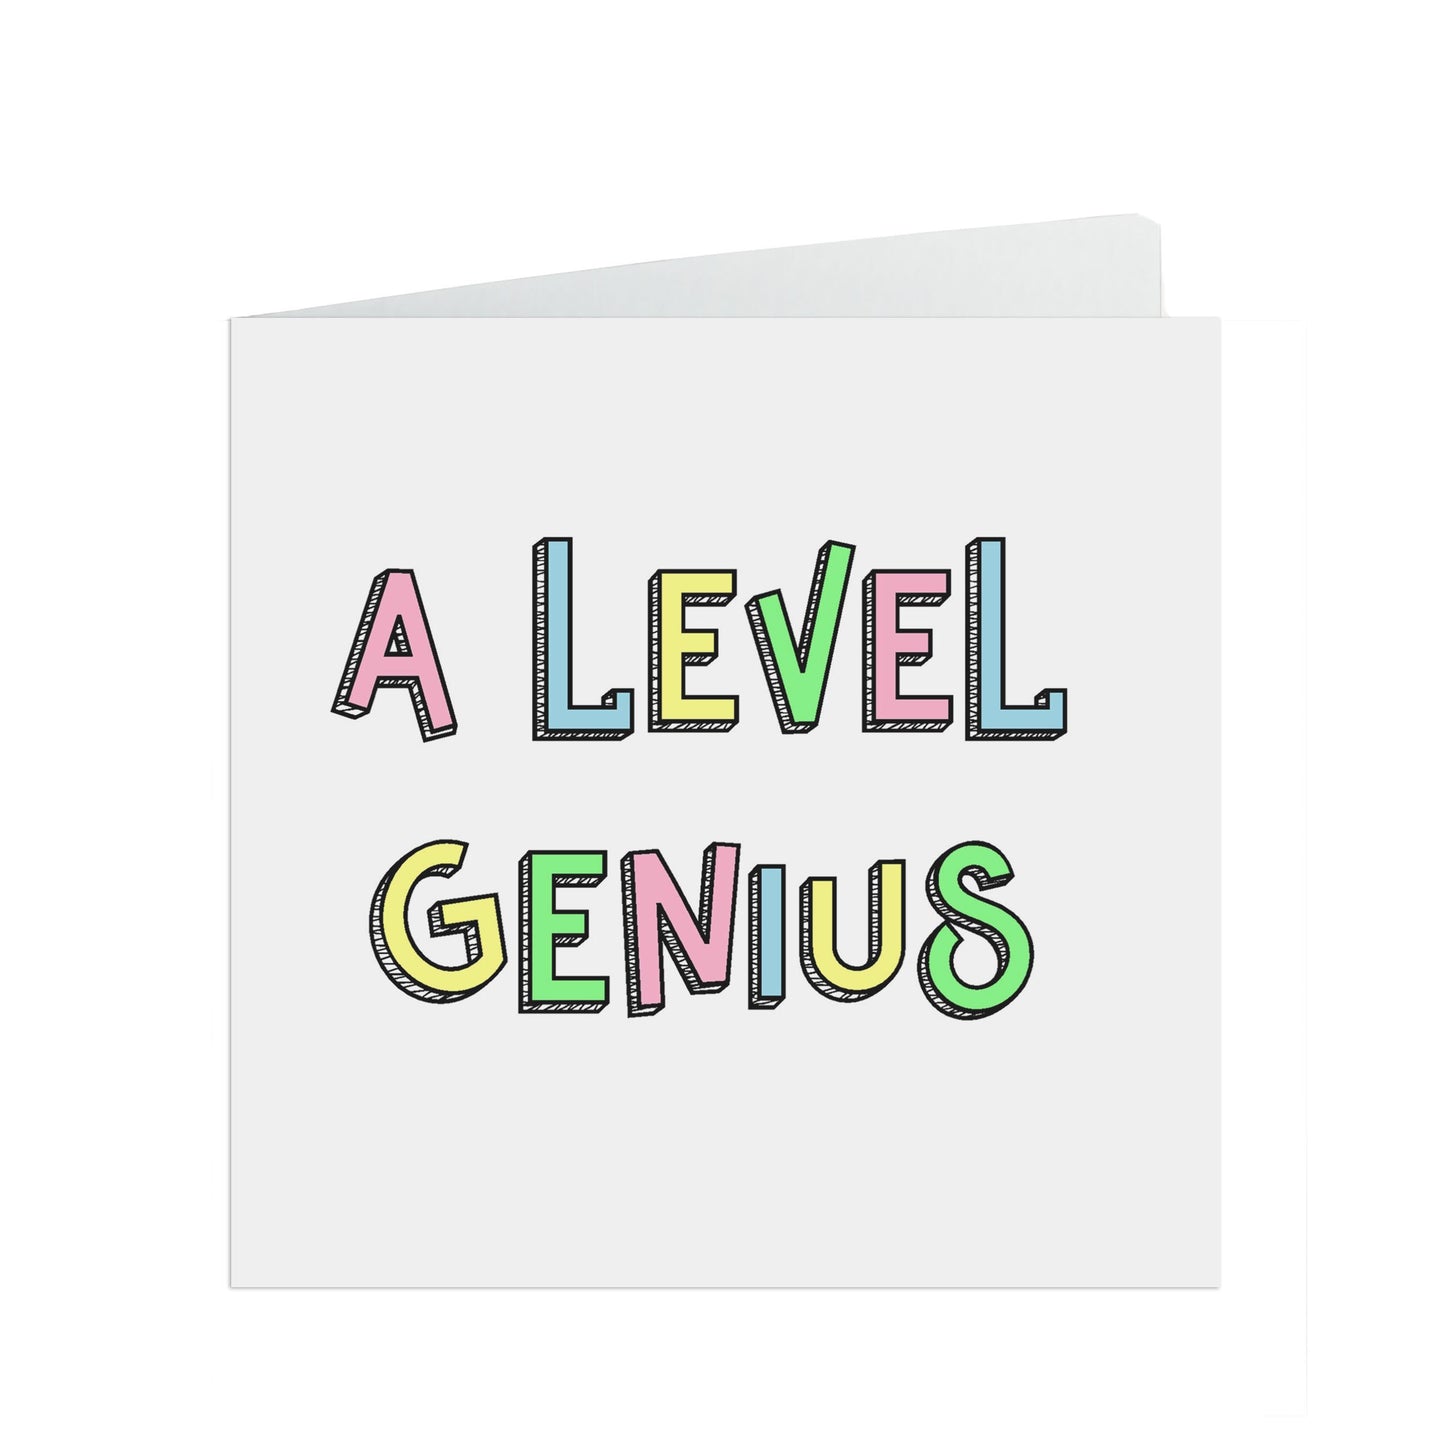 A Level Genius! Congratulations passed exams or graduated funny card